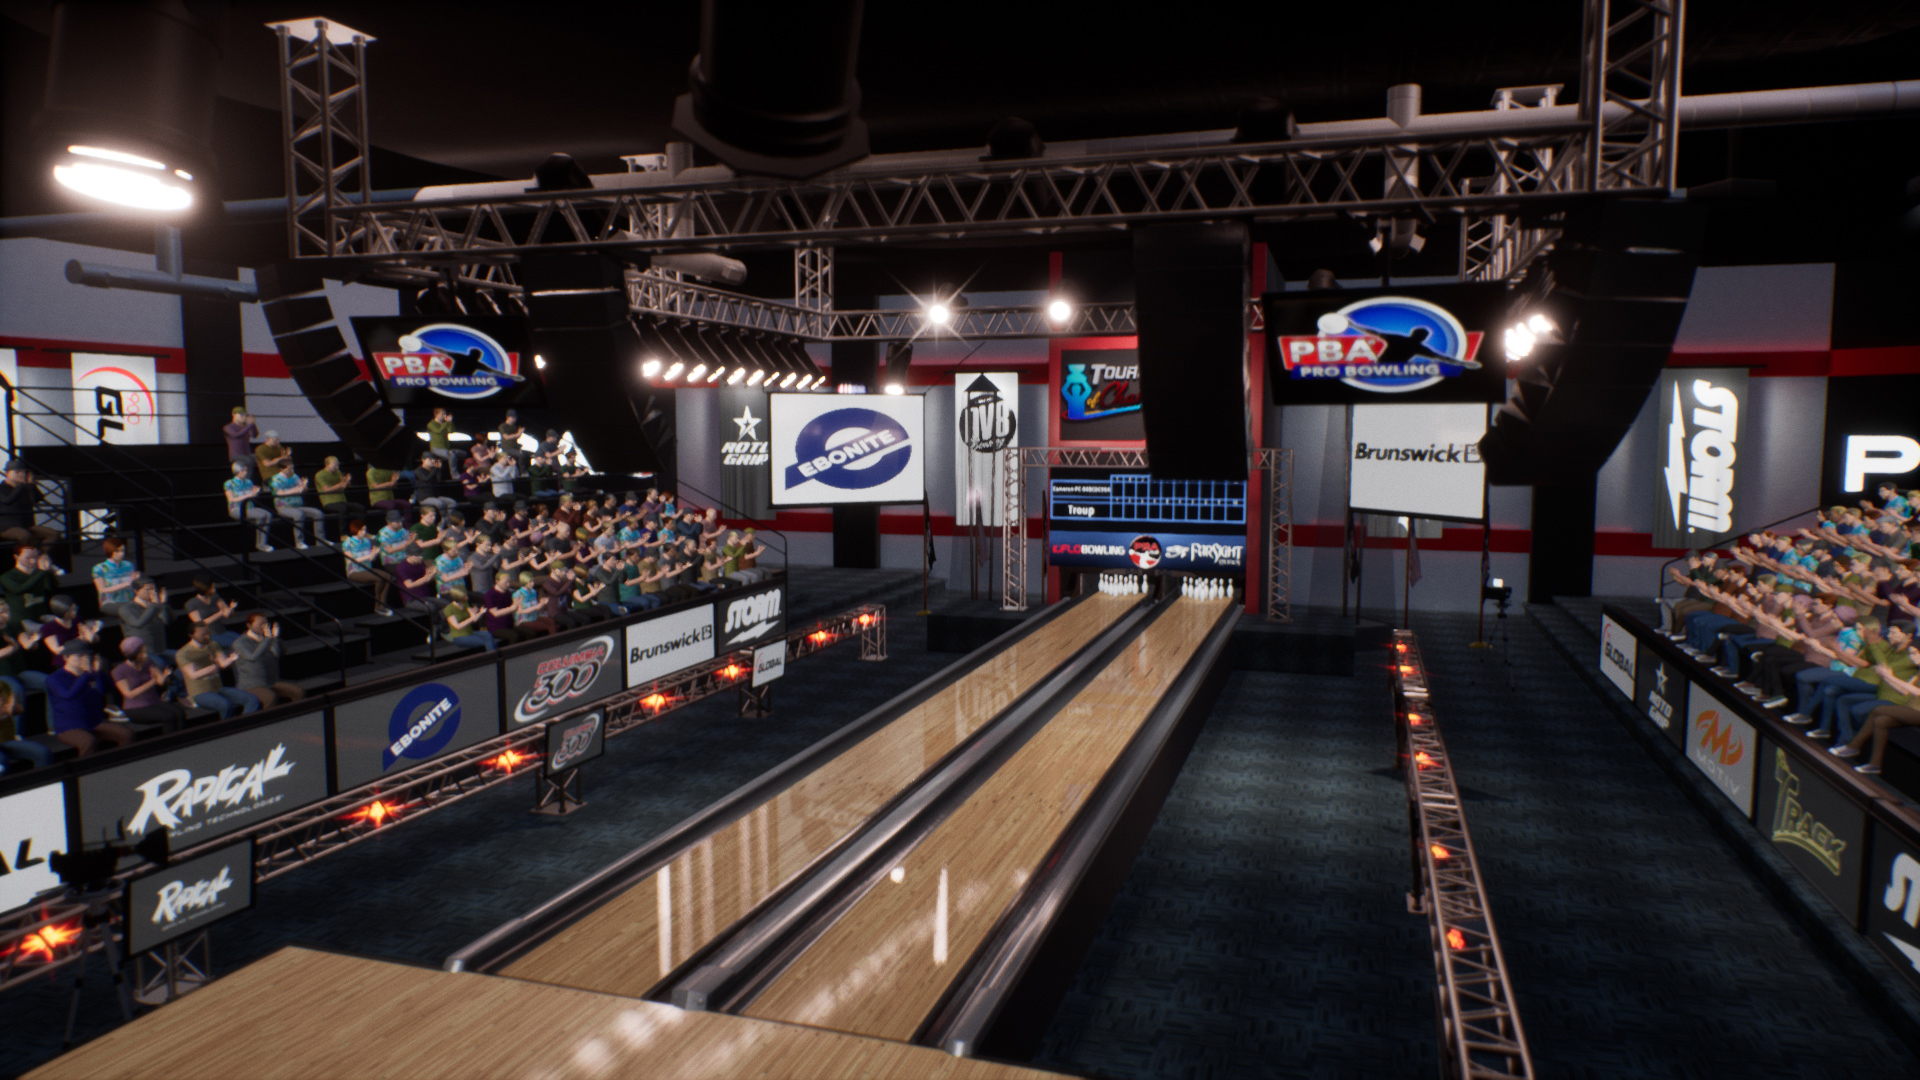 Pba Pro Bowling for PS4 — buy cheaper in official store • PSprices USA